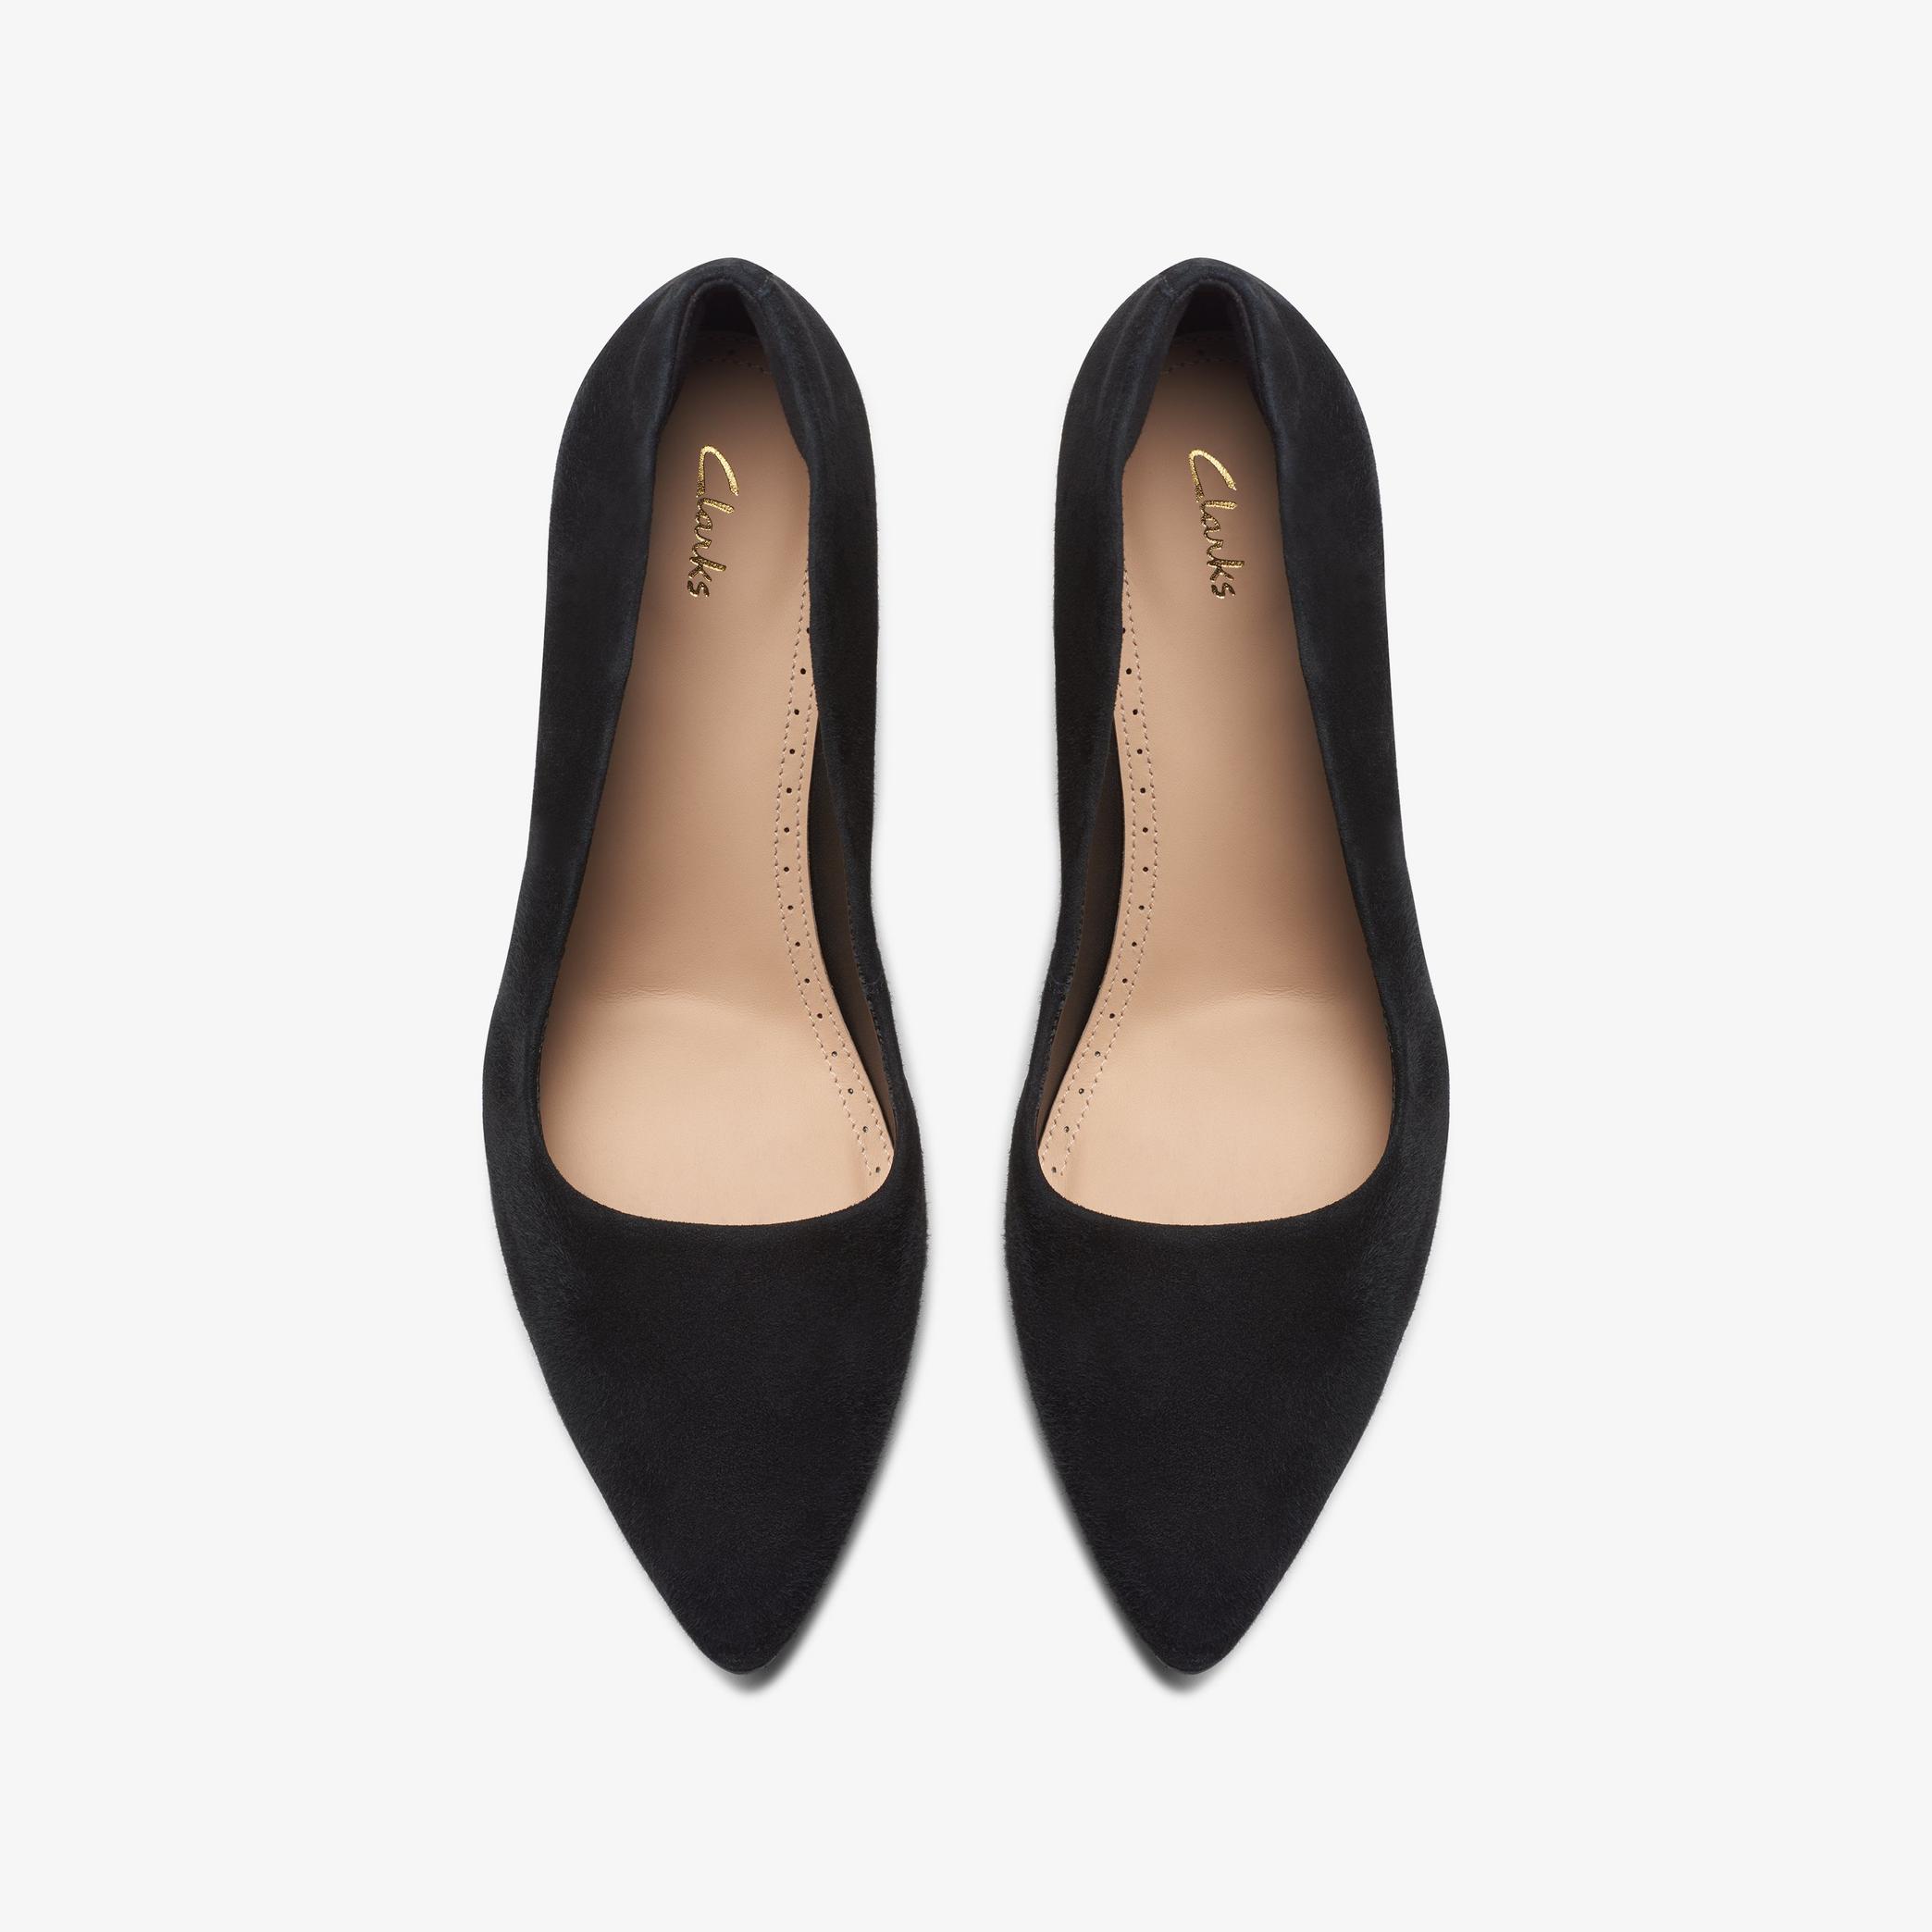 Laina Rae Black Suede Court Shoes, view 6 of 6